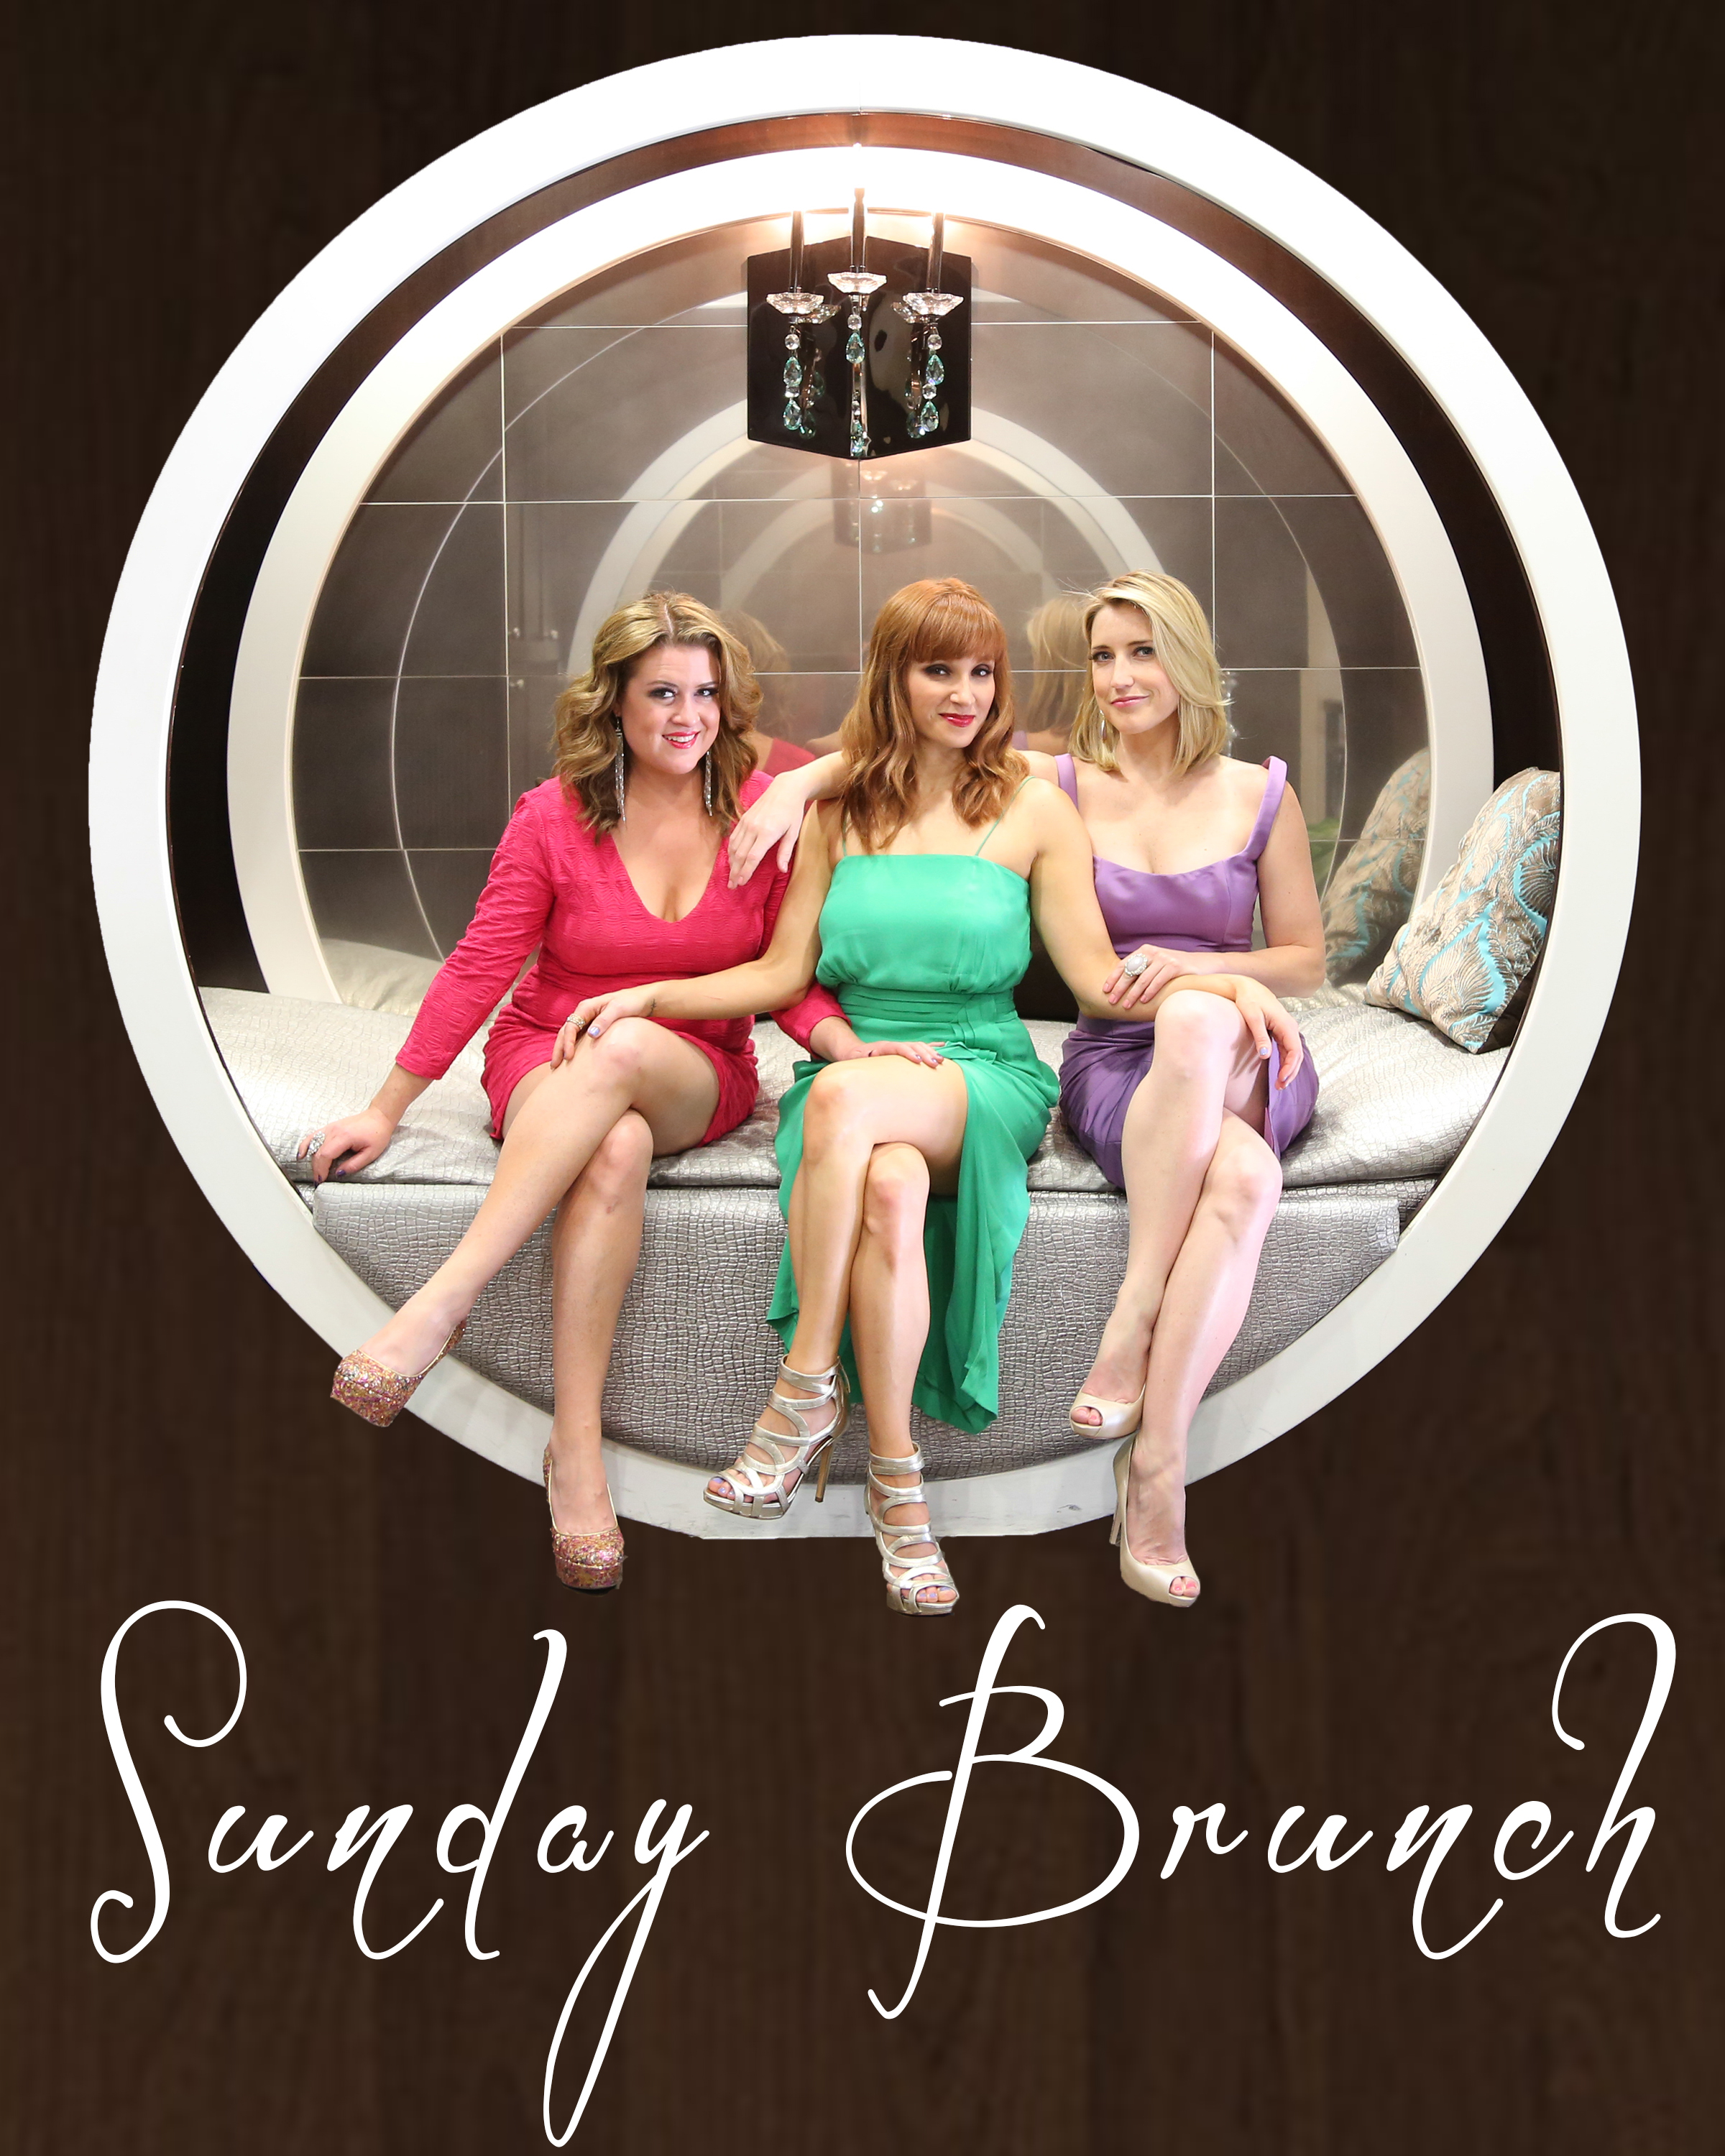 Sunday Brunch The Series official poster